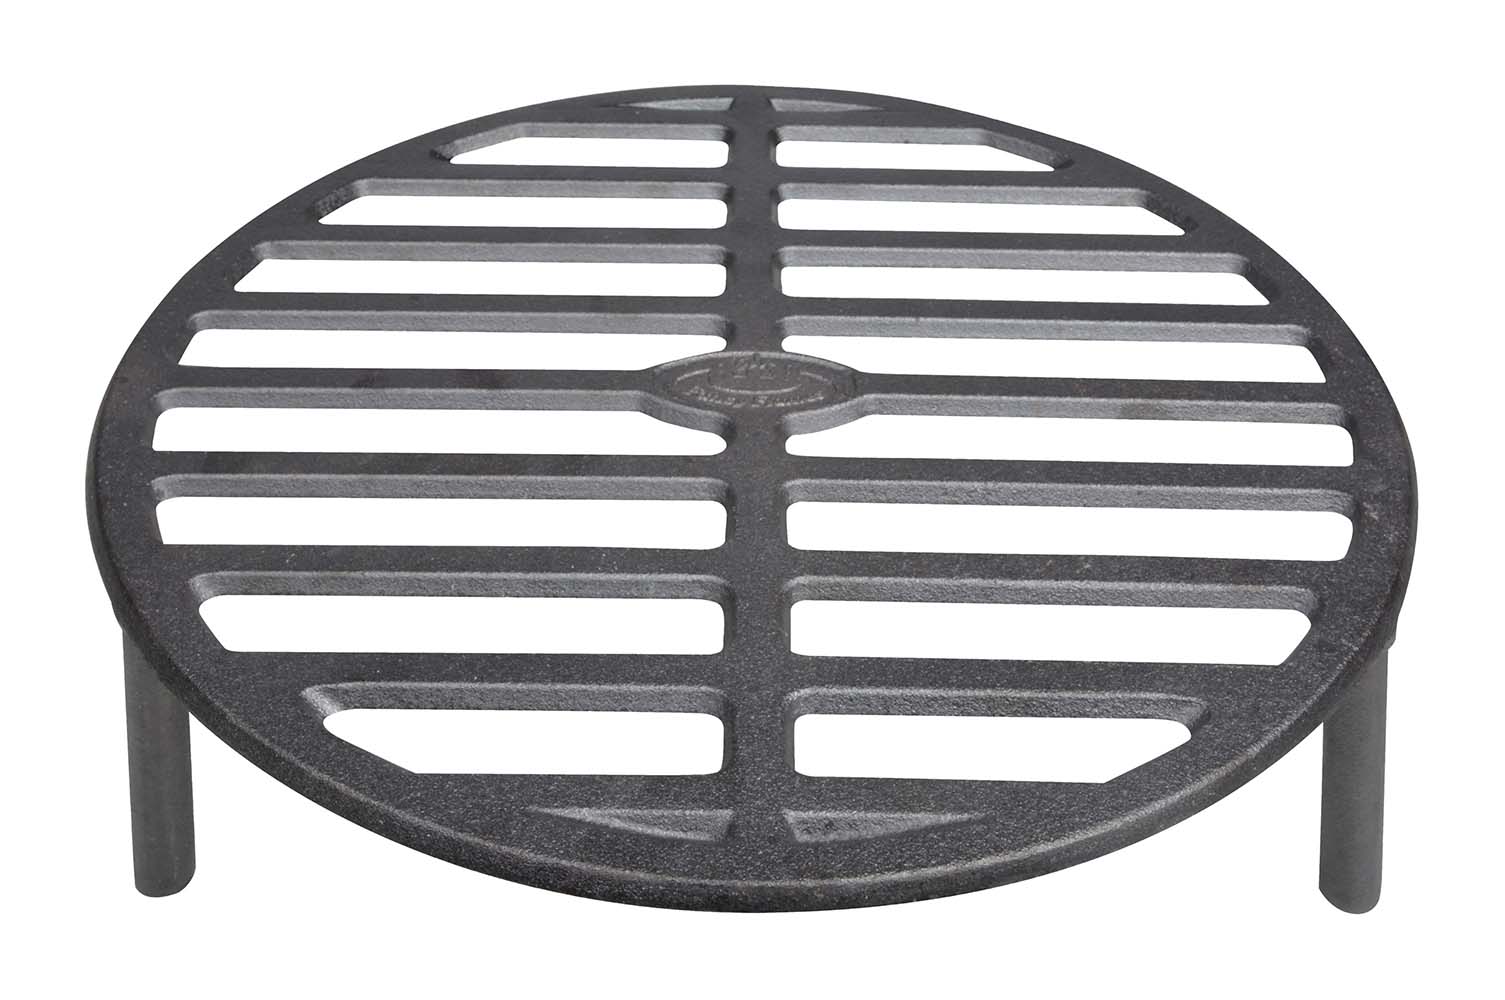 8192600 A robust grid for over the campfire. You can grill delicious meat and vegetables on this grid. The grid can be used in a fire bowl, fire ring or over an open campfire. Due to the quality and stability of the grid, it is also possible to place a pan or campfire pot on it.